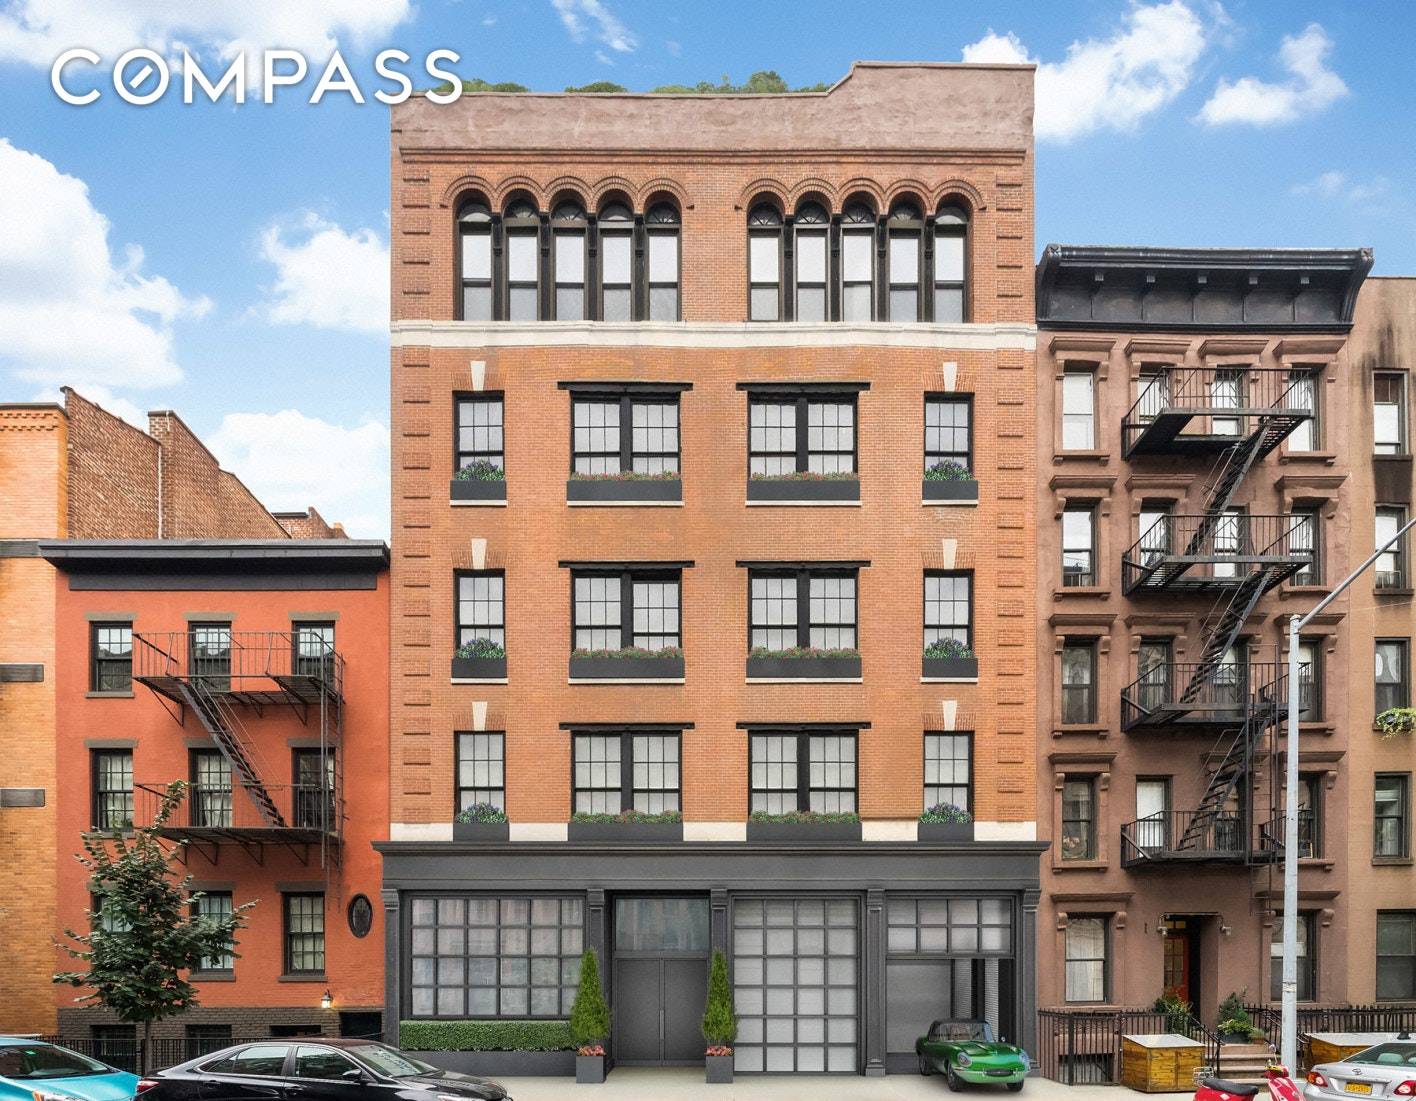 332 West 11th represents the most rare breed of properties in the highly coveted West Village an ultra wide building suitable for a Mansion sized single family home.